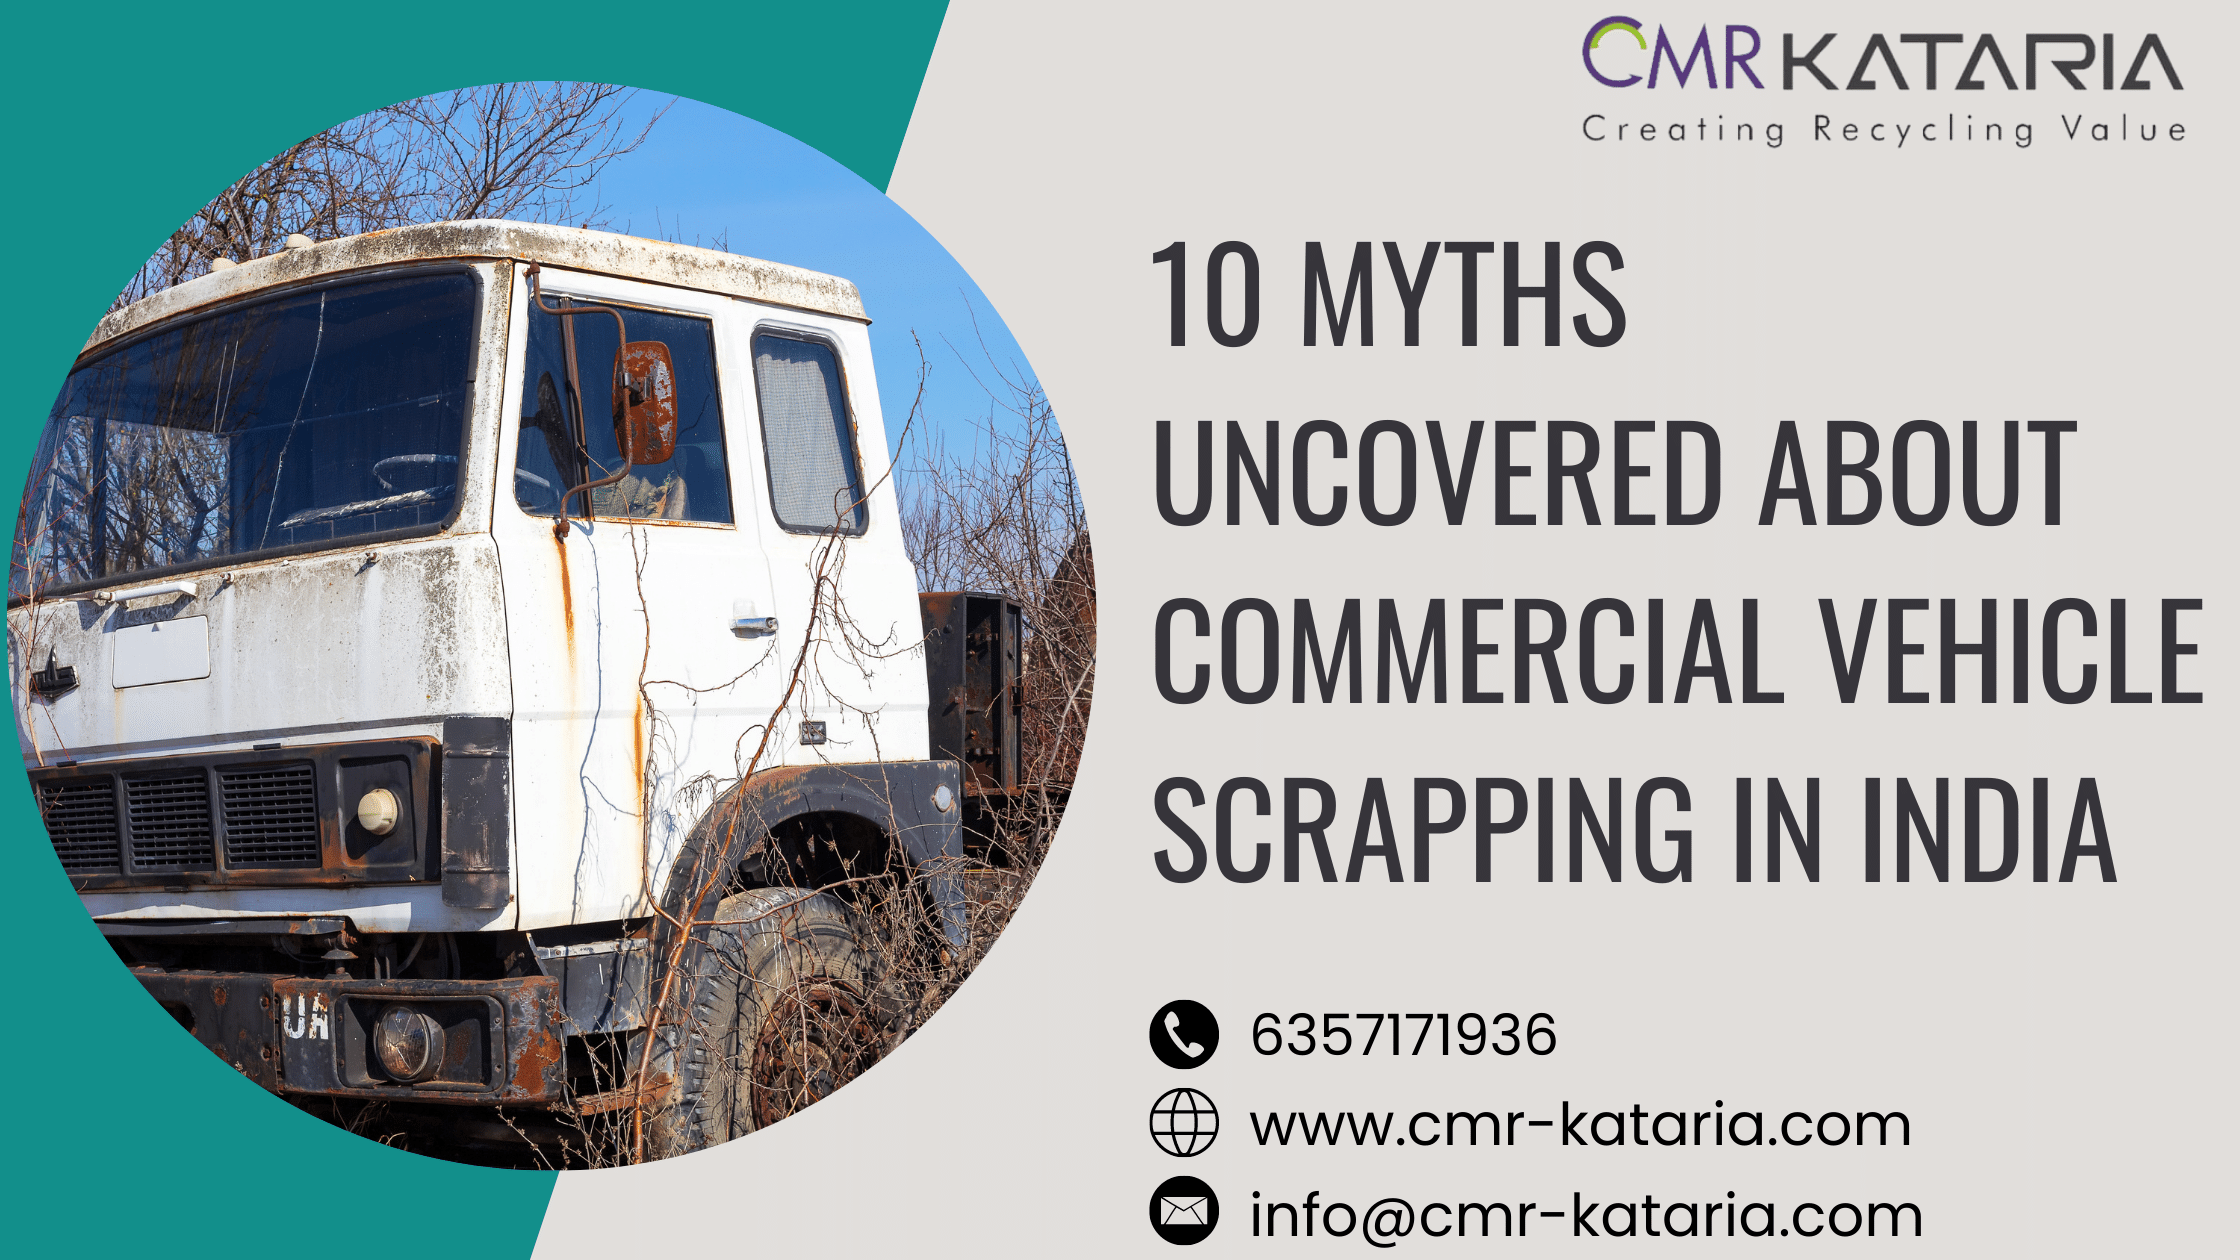 10 Myths Uncovered About Commercial Vehicle Scrapping in India